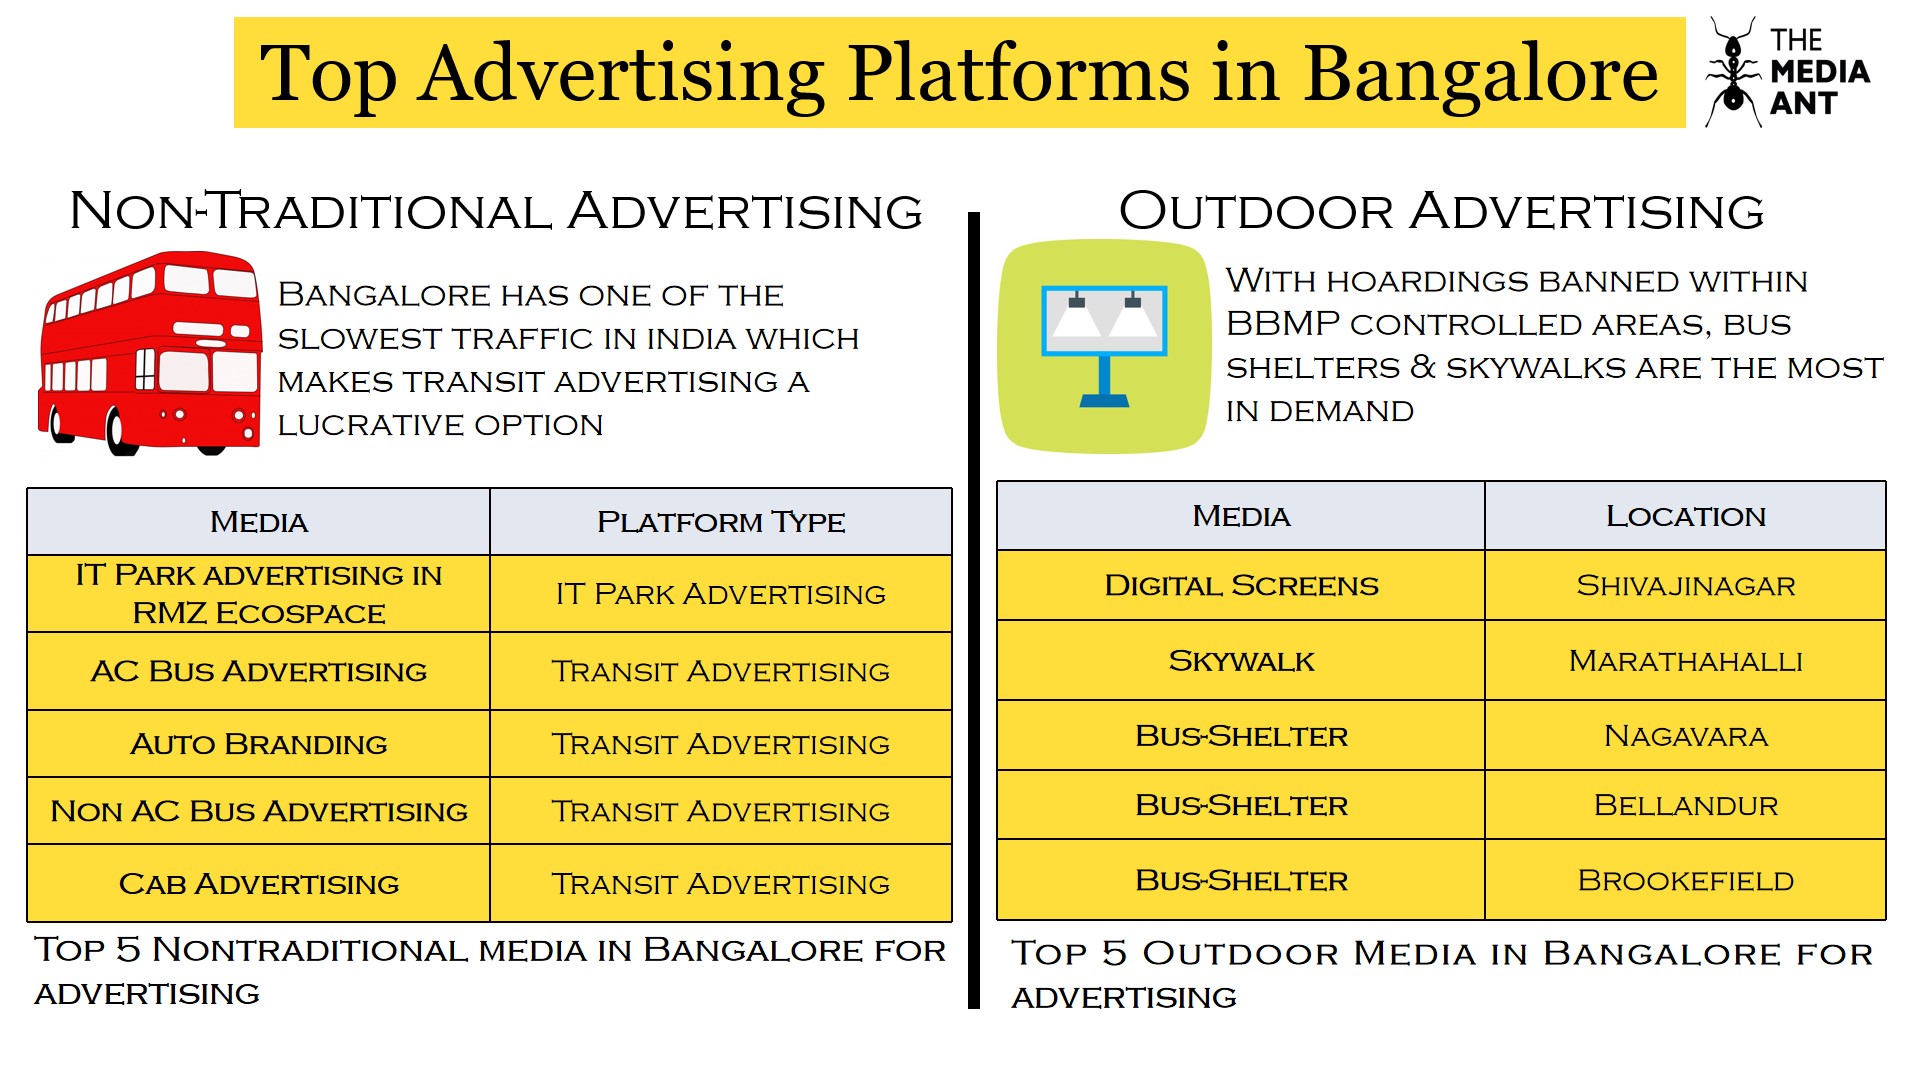 Non-Traditional And Outdoor Advertising Media In Bangalore